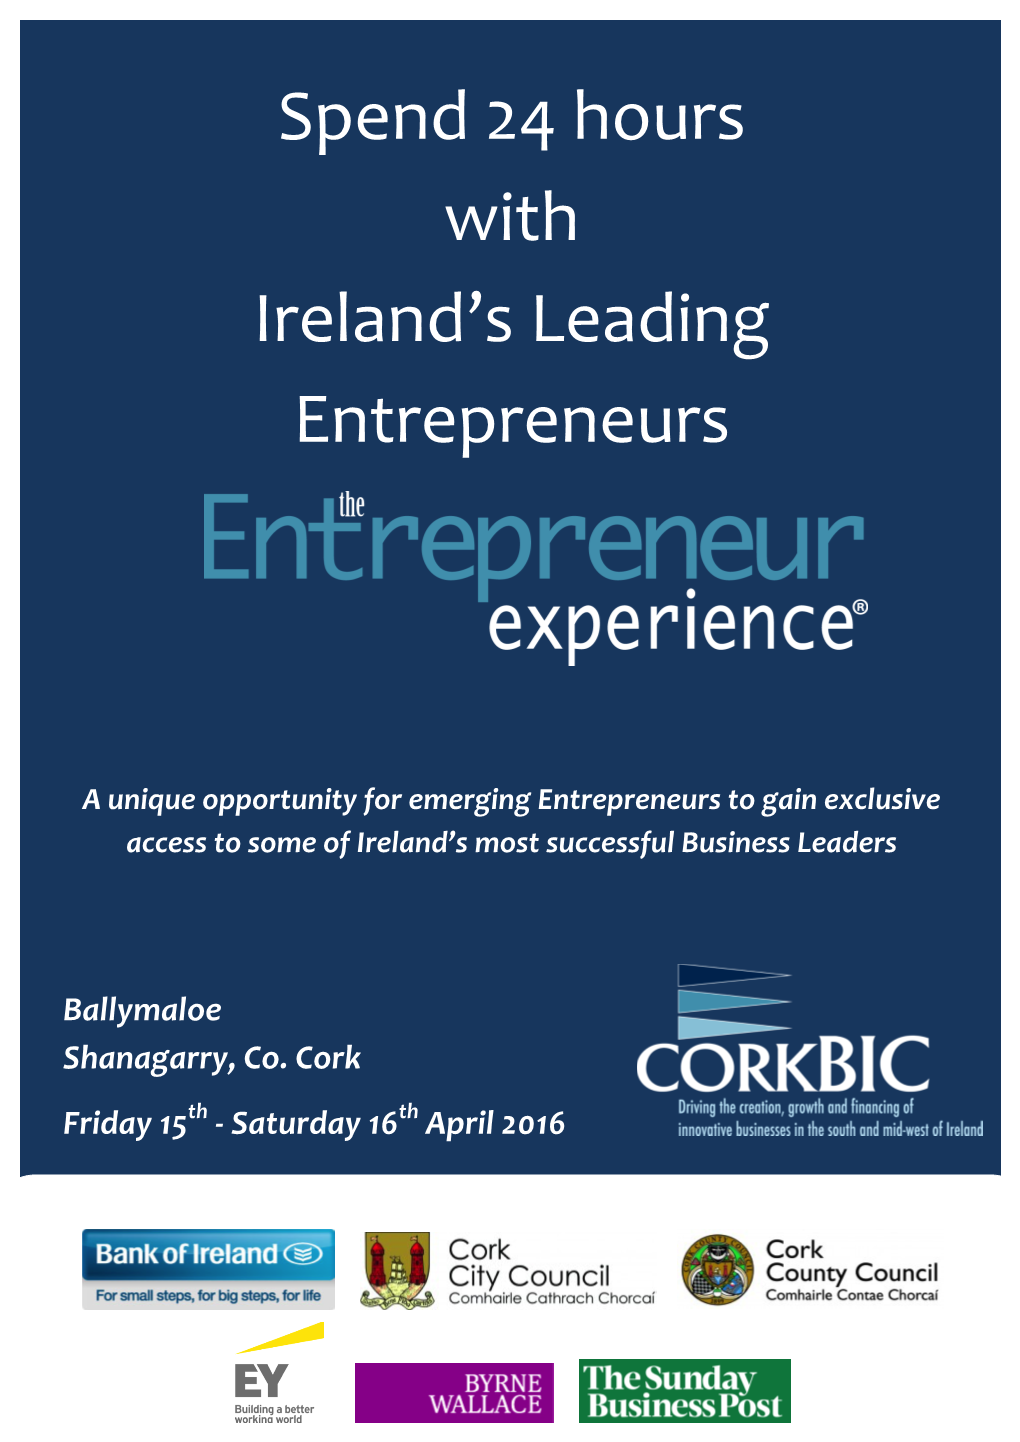 Spend 24 Hours with Ireland's Leading Entrepreneurs